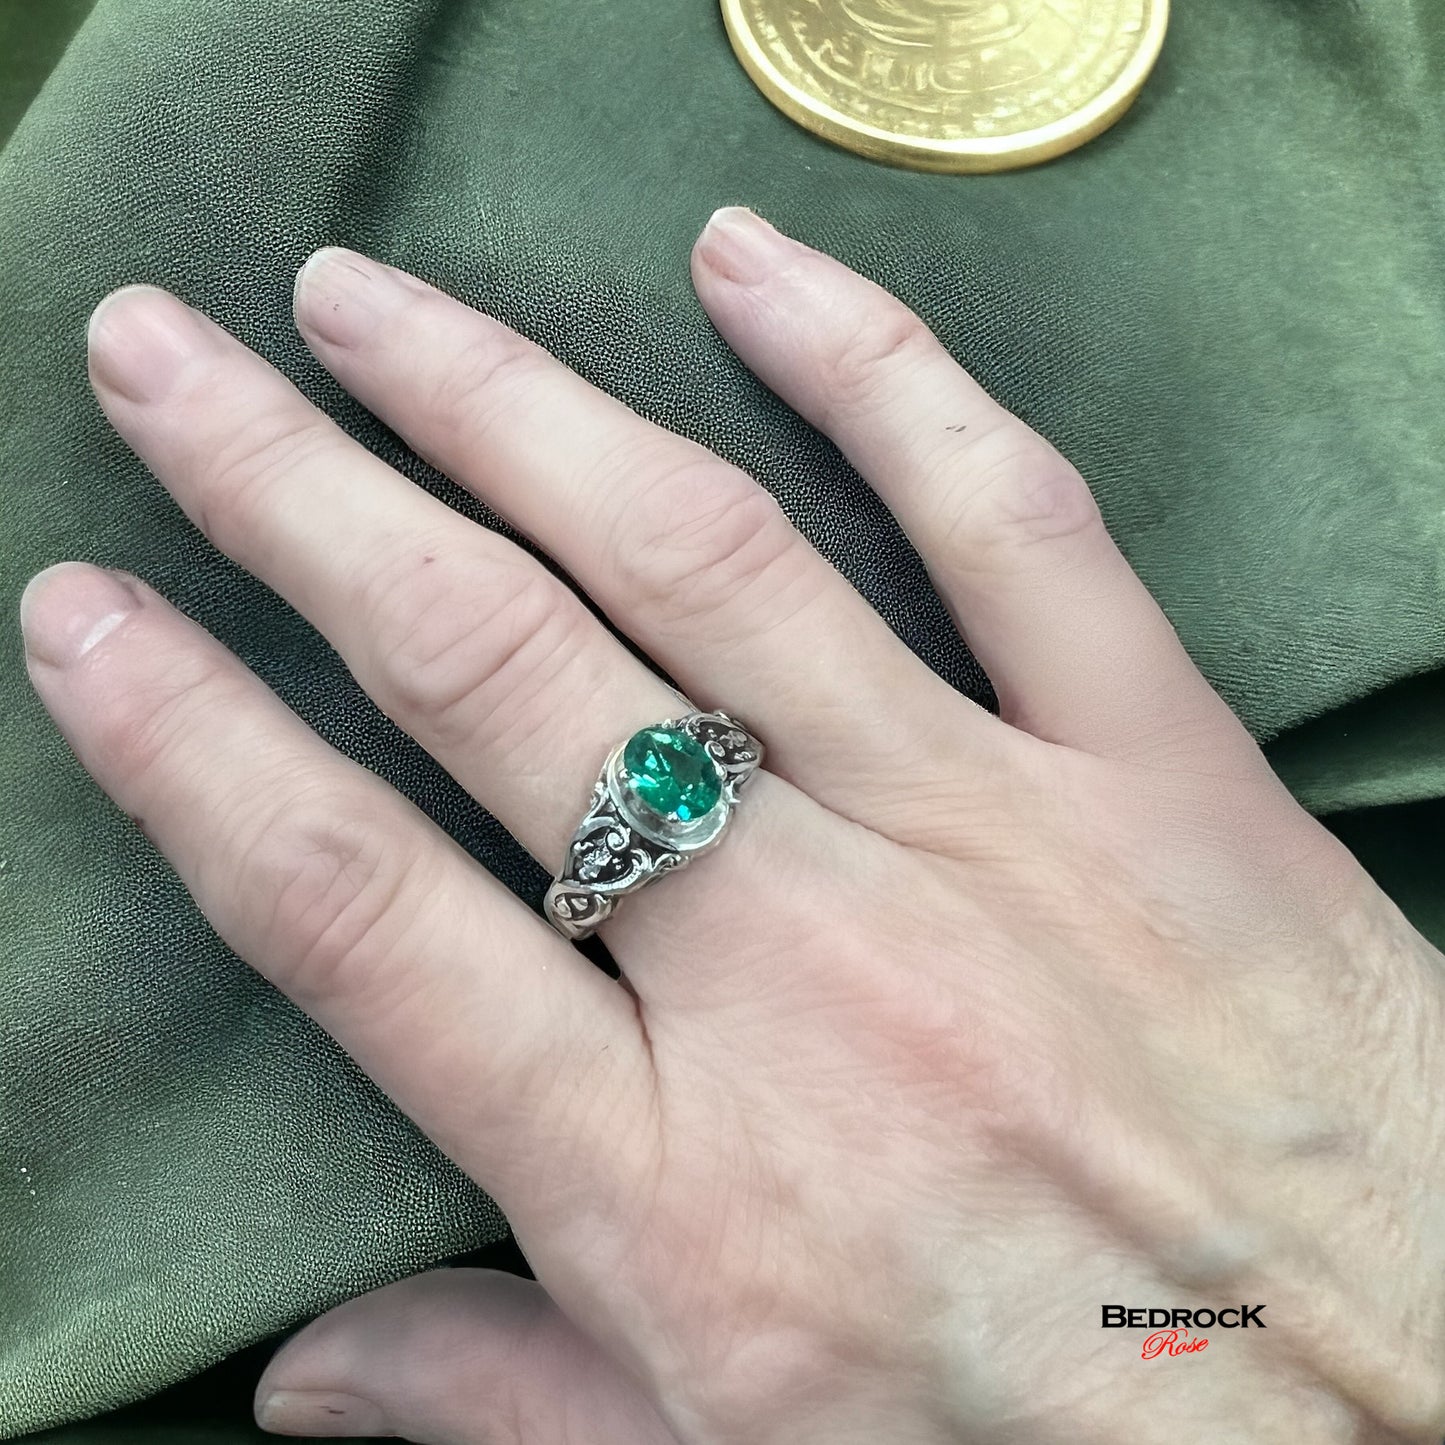 Victorian Style Emerald Green Sterling Silver Ring, Victorian Sterling Silver Ring, Green faceted stone ring, Shreve & Co Sterling Silver Ring, Intricately designed victorian ring, Edwardian style ring